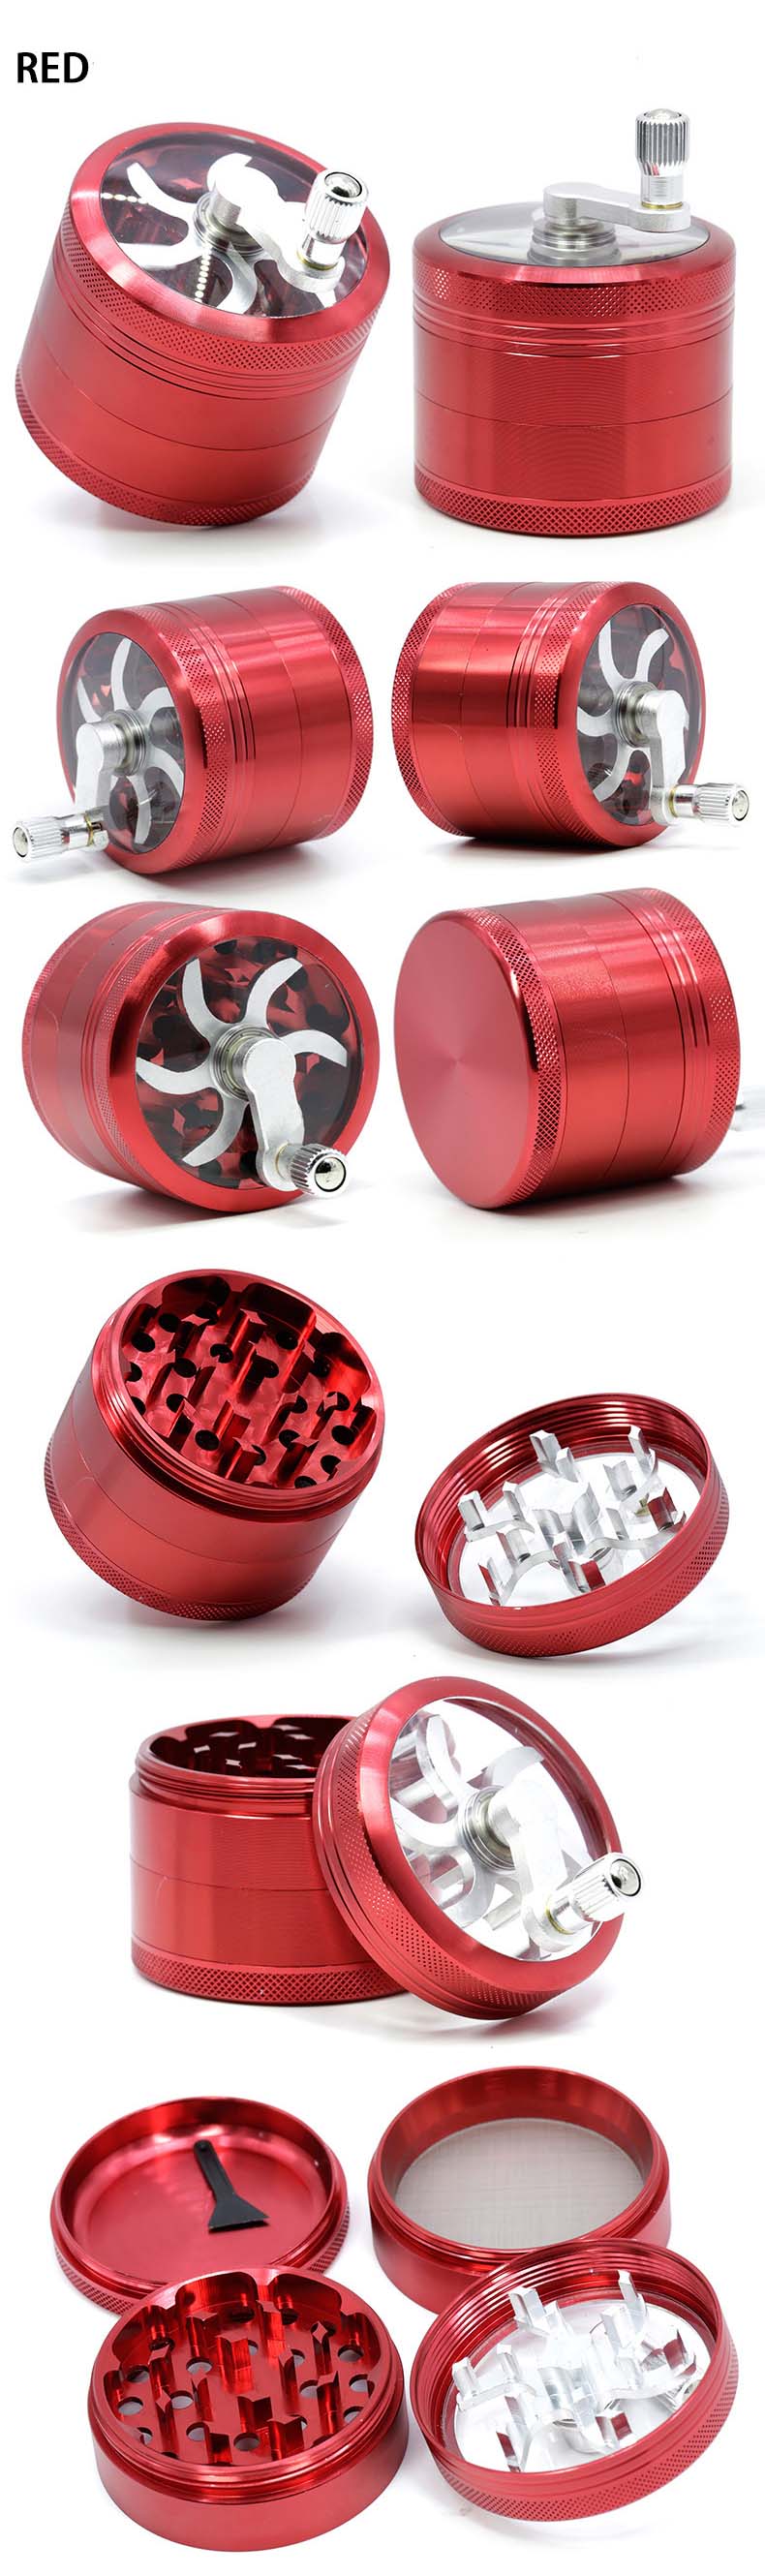 4 Layer 63mm Diameter Aluminum Alloy Handle Weed Grinder for Wholesale